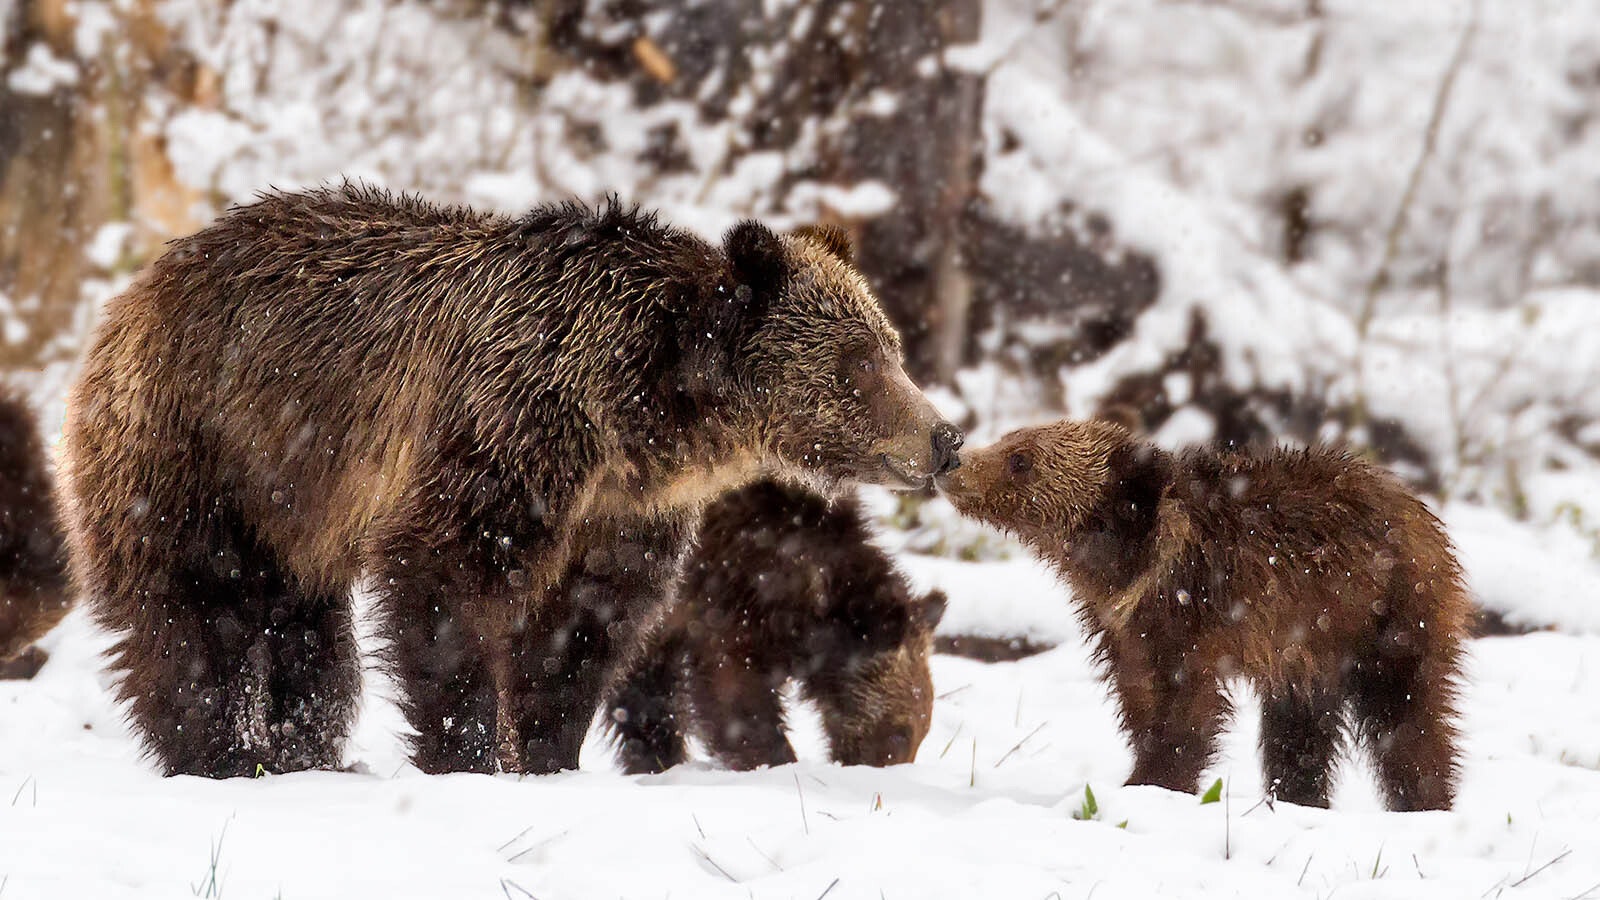 A grizzly so and her cubs in Yellowstone.